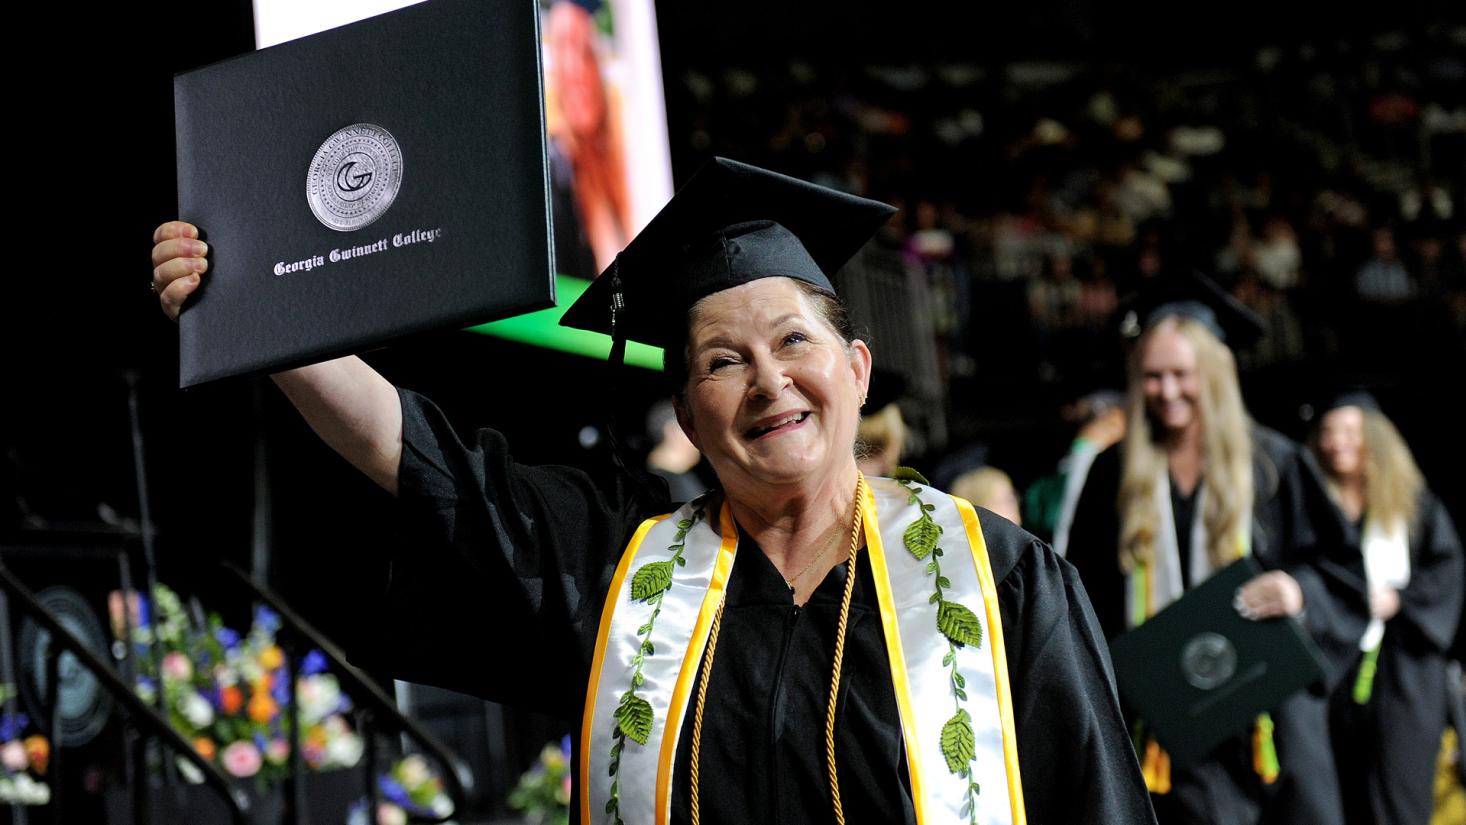 Woman holding up degree at graduation ceremony